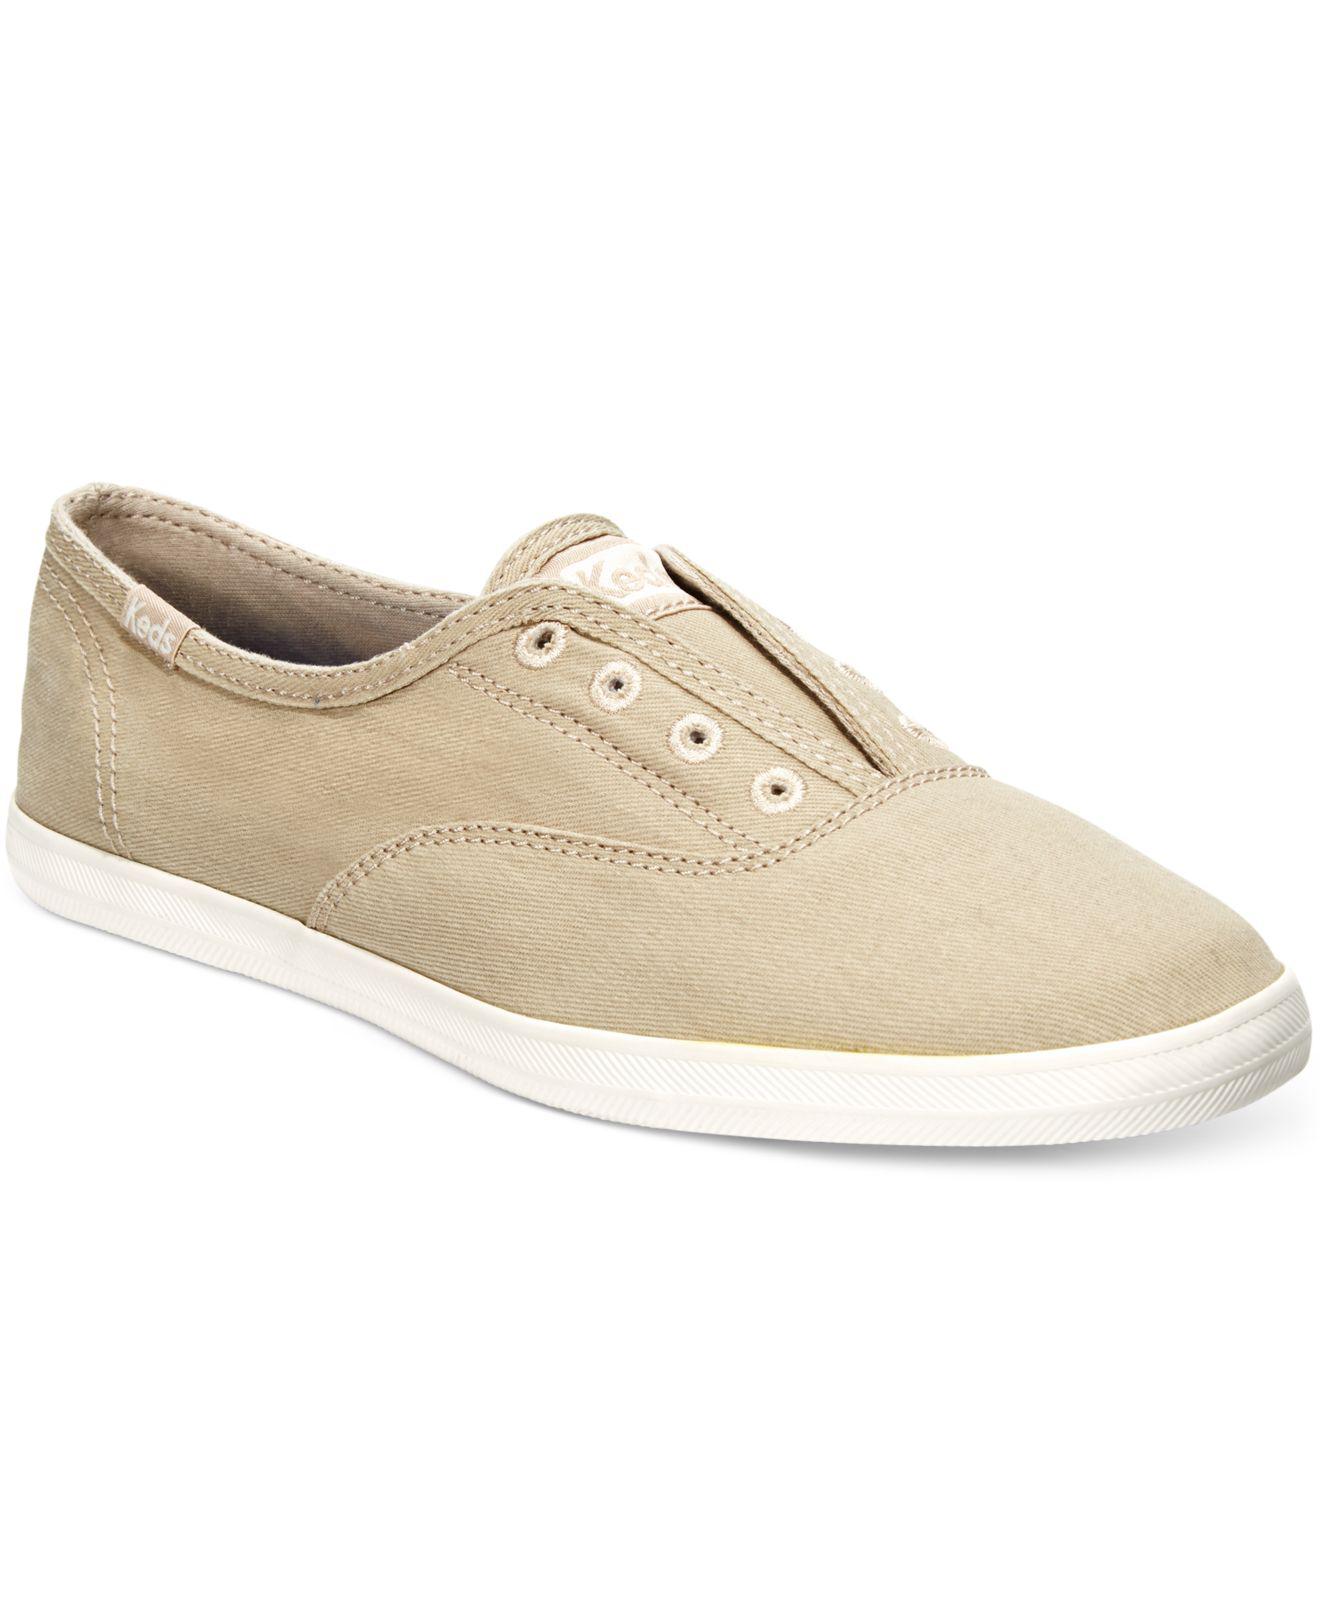 Lyst - Keds Chillax Slip-on Laceless Sneakers